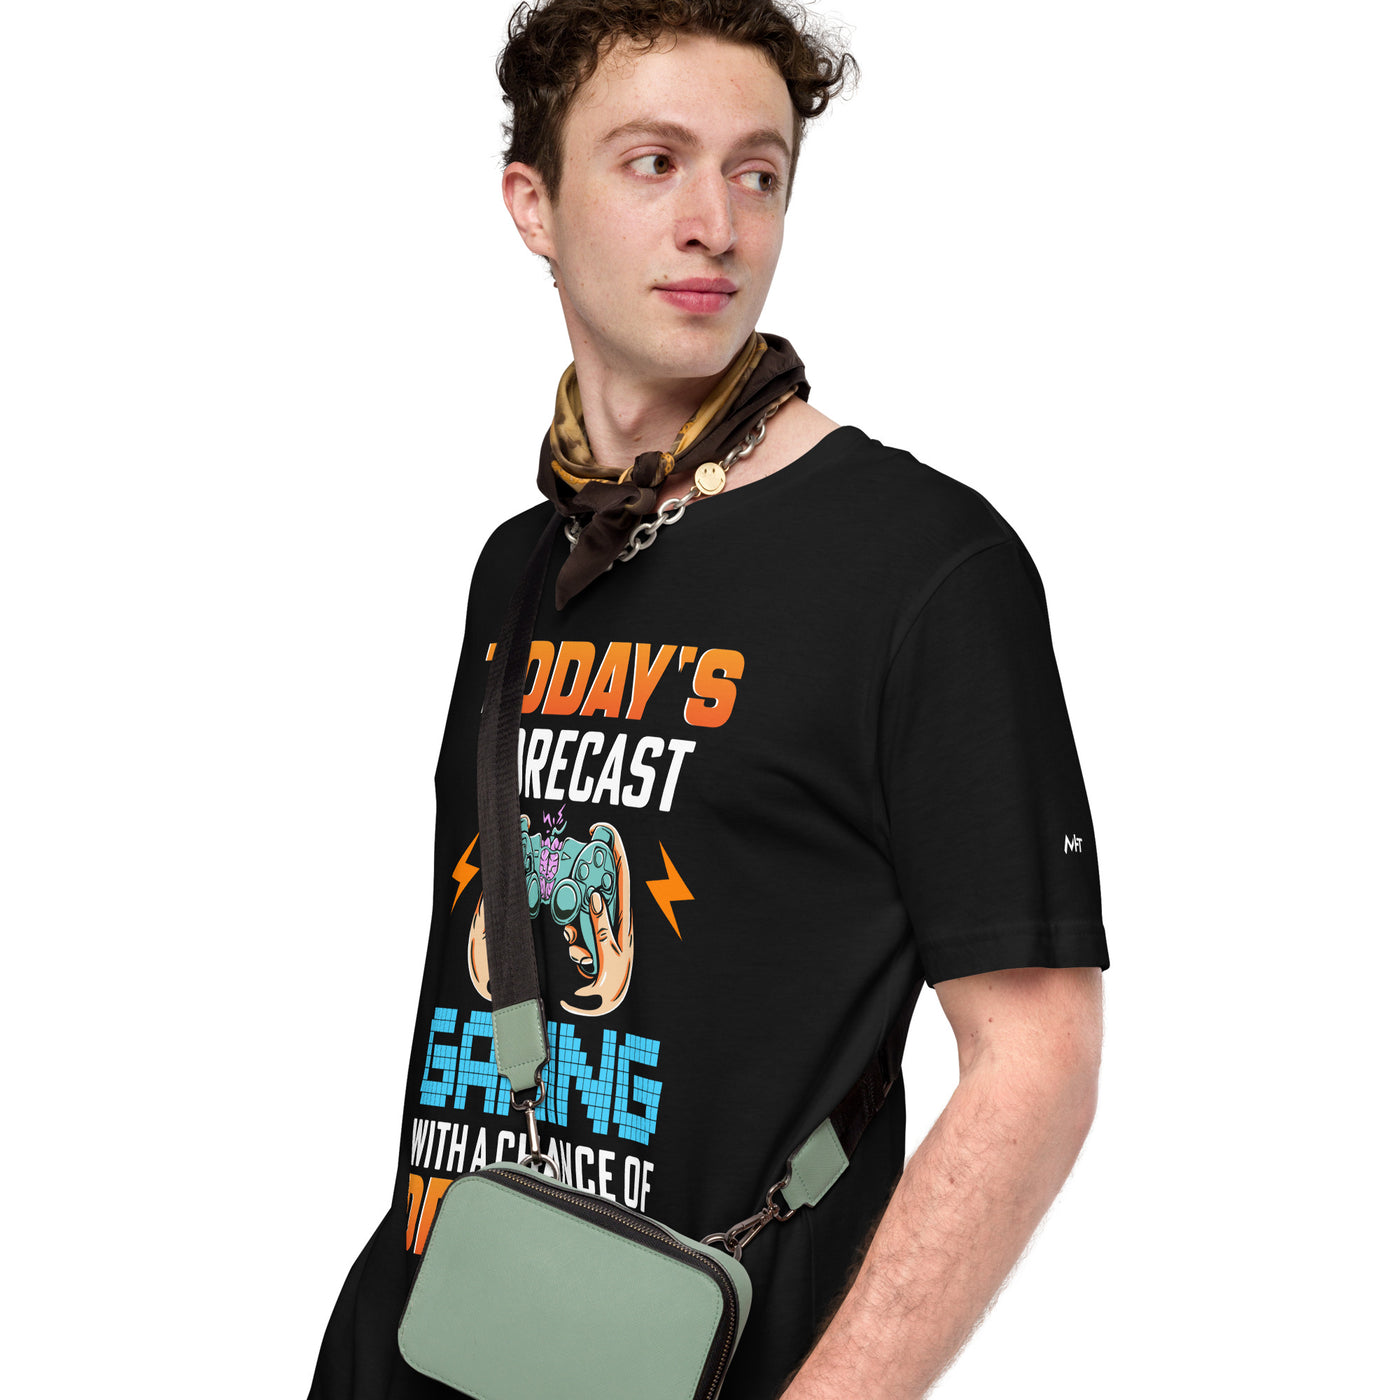 Today's Forecast; Gaming with a Chance of Drinking - Unisex t-shirt